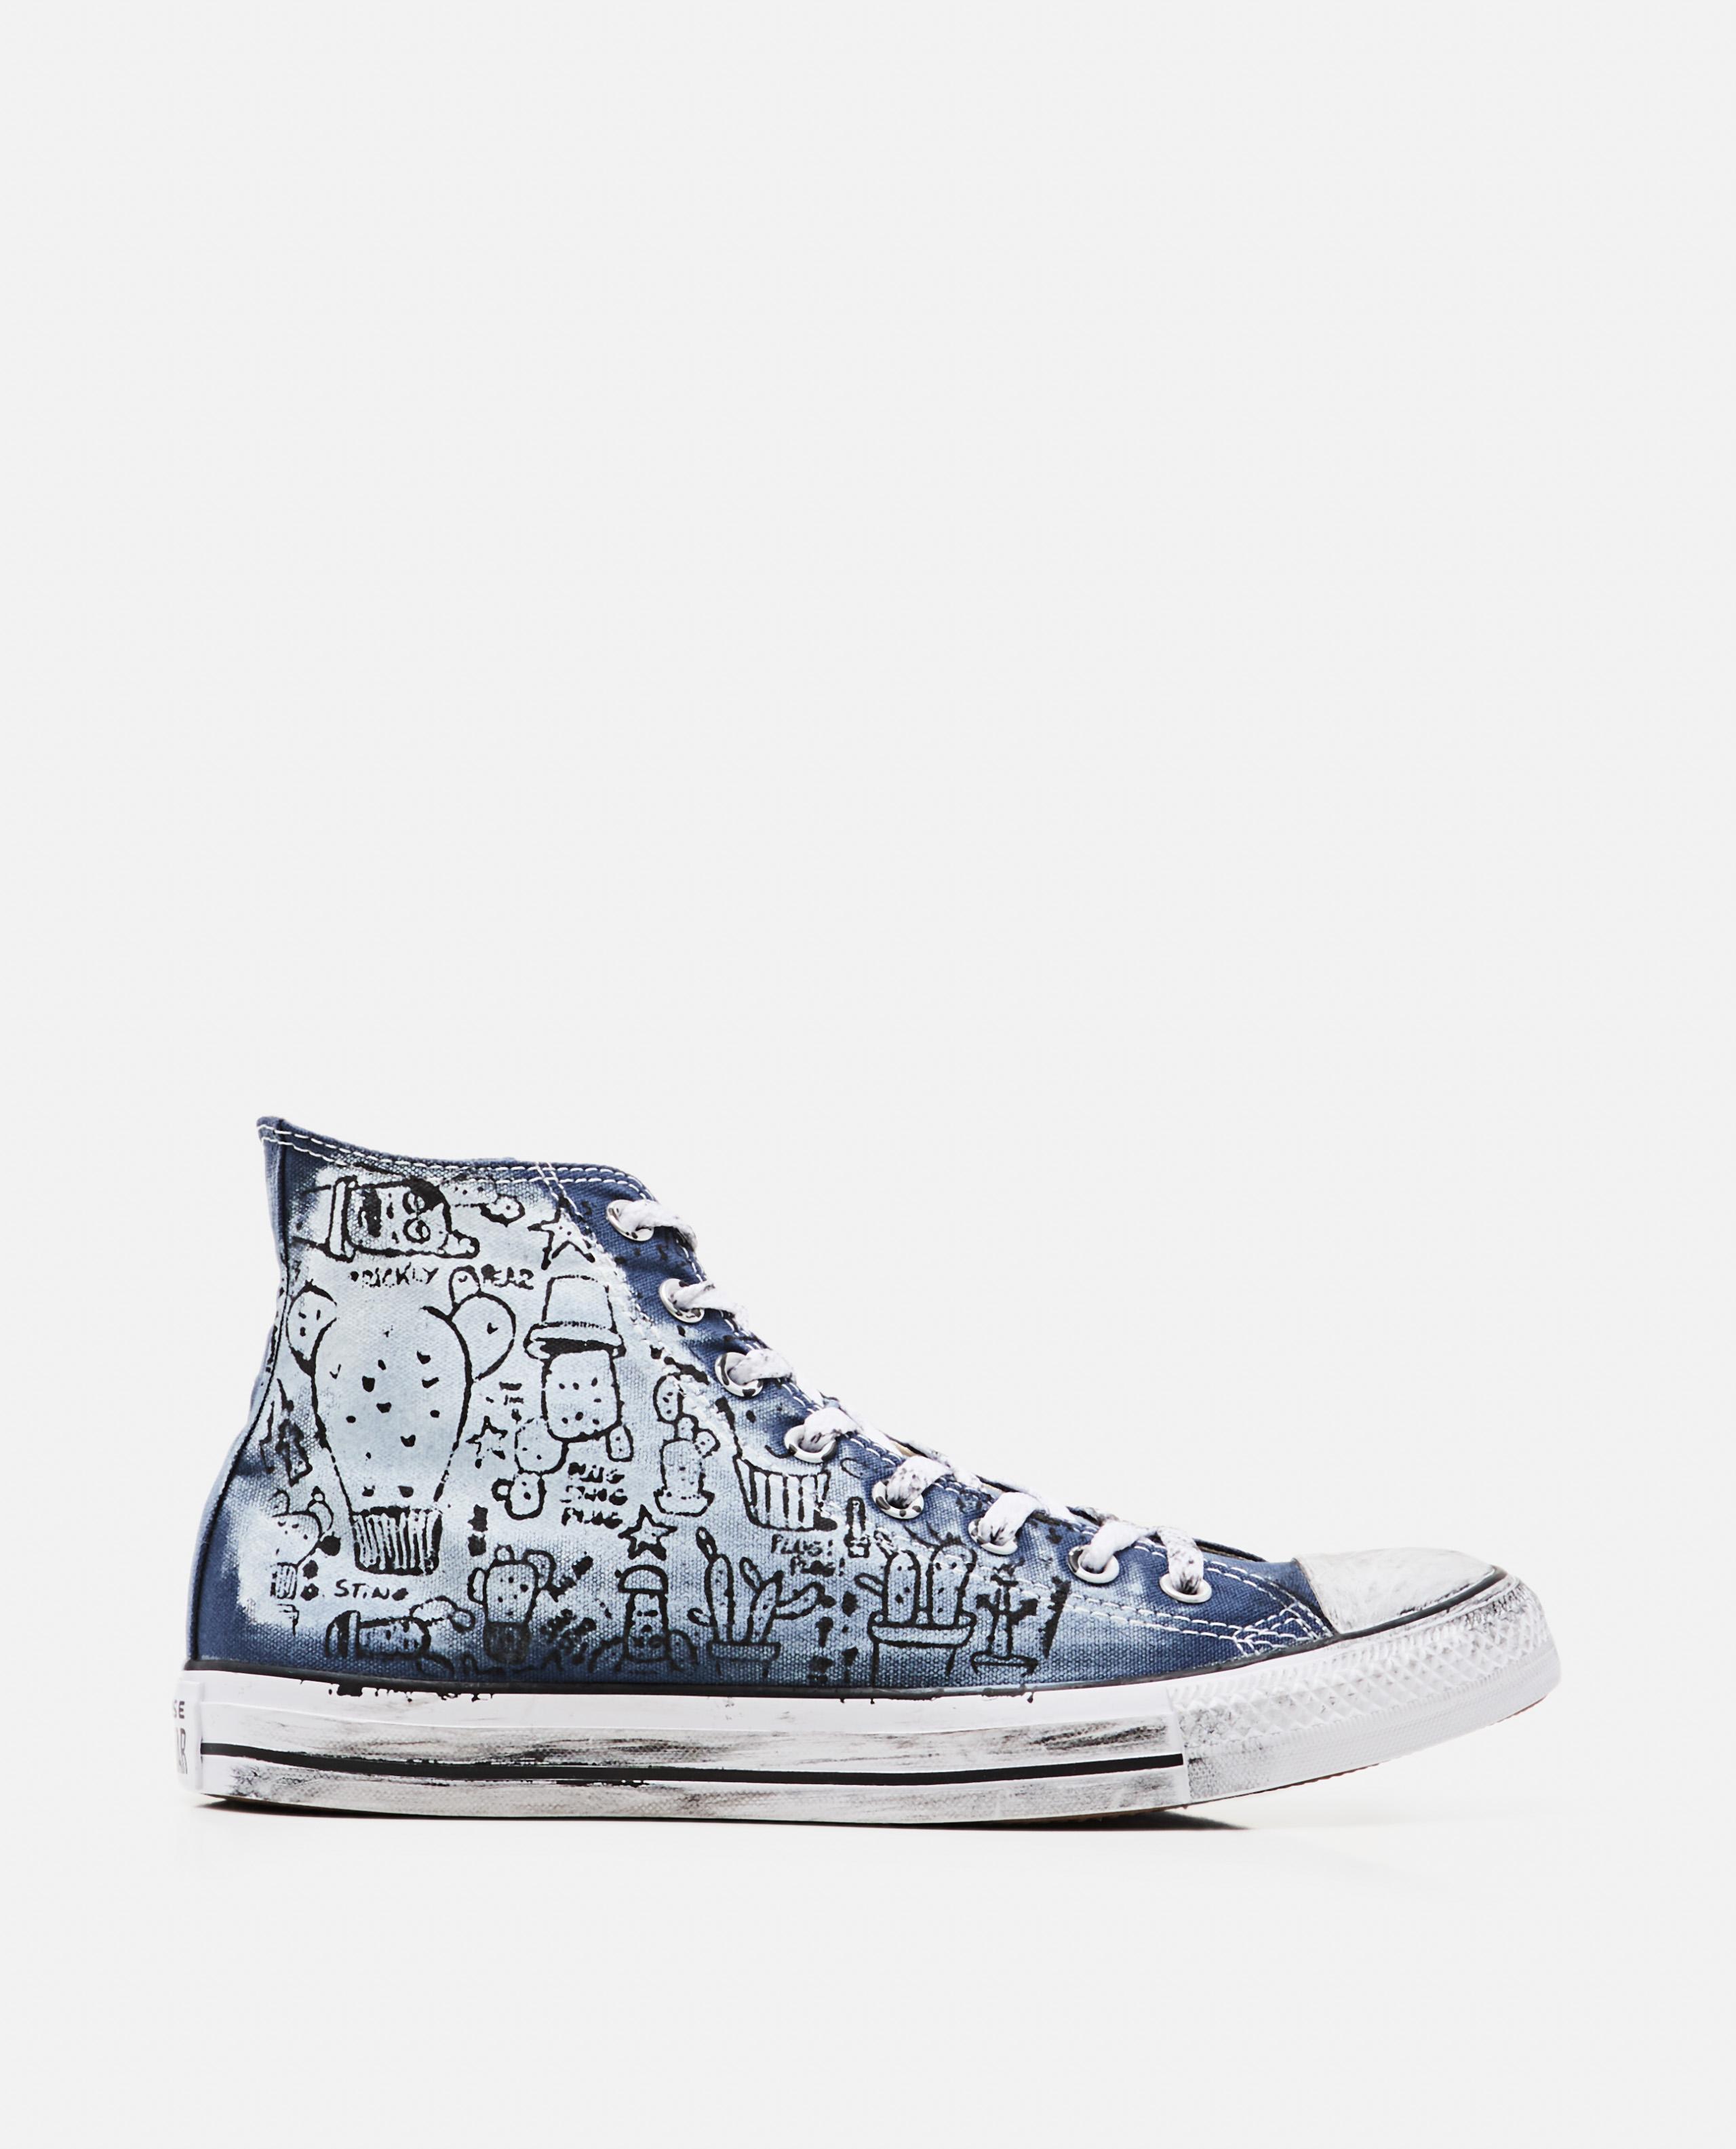 Converse Hand-painted Graffiti Chuck Taylor All Star High Top in Azure  (Blue) for Men - Lyst